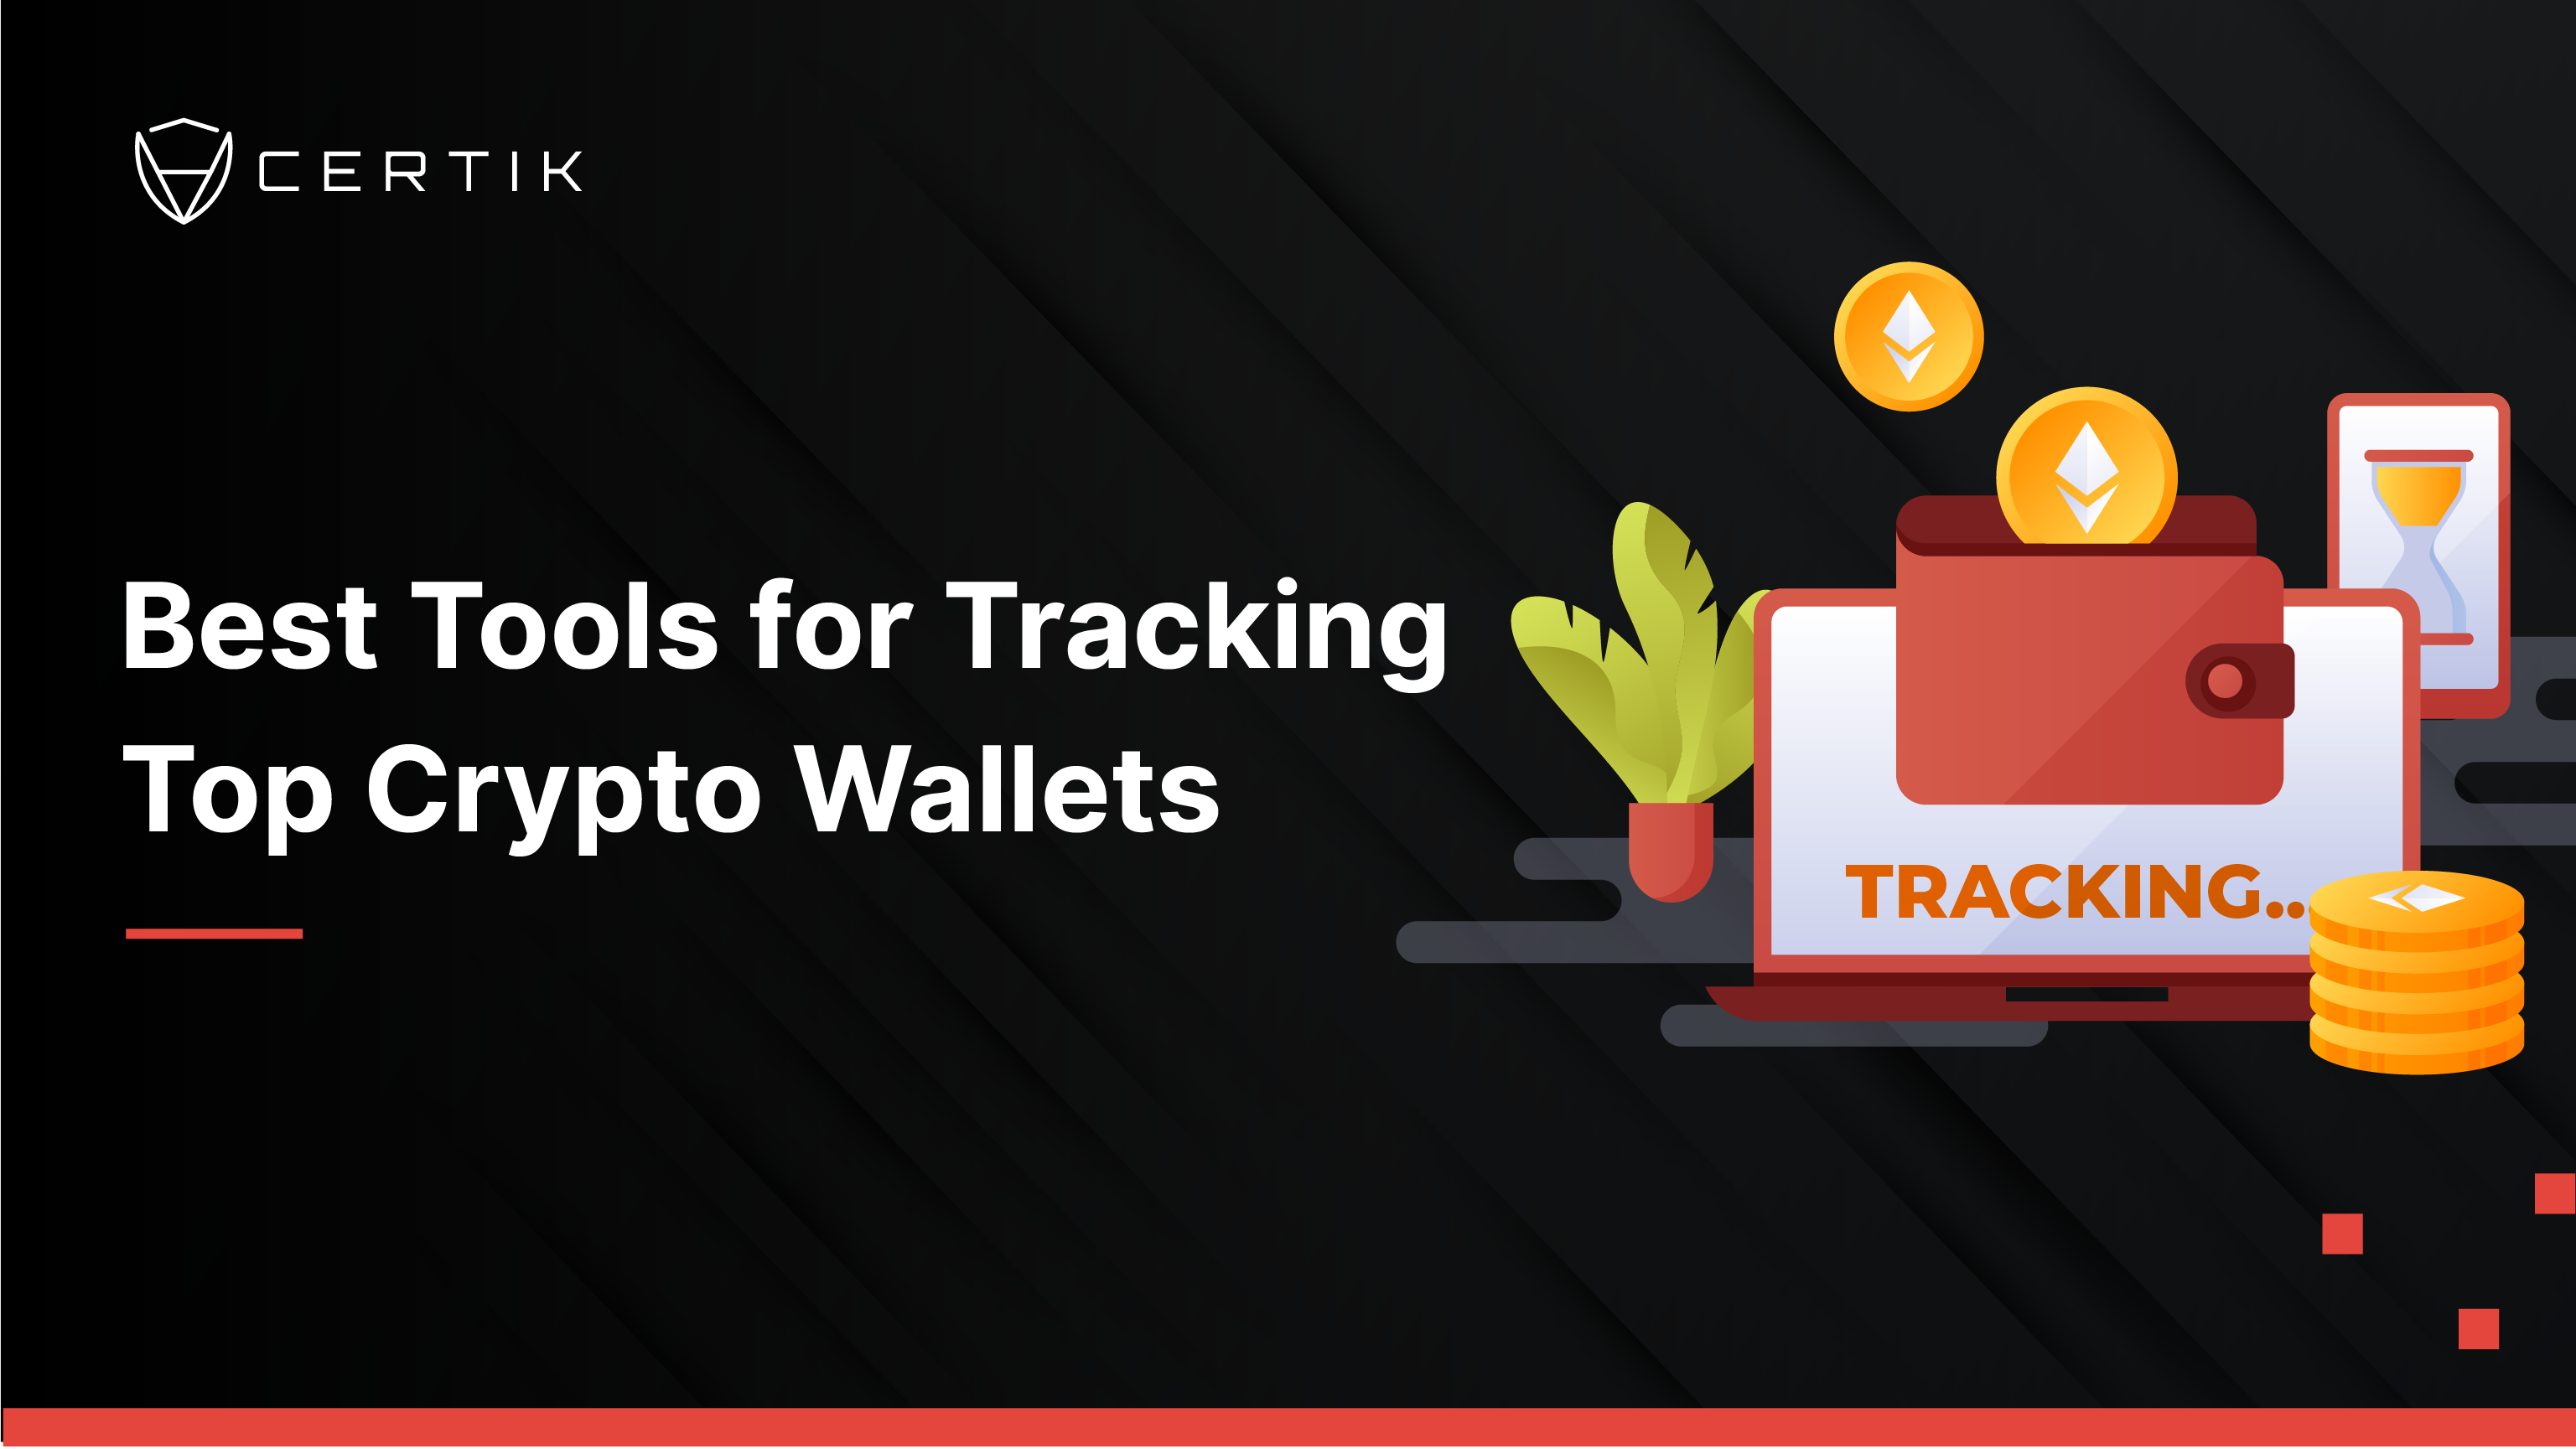 Best Tools for Tracking Top Crypto Wallets